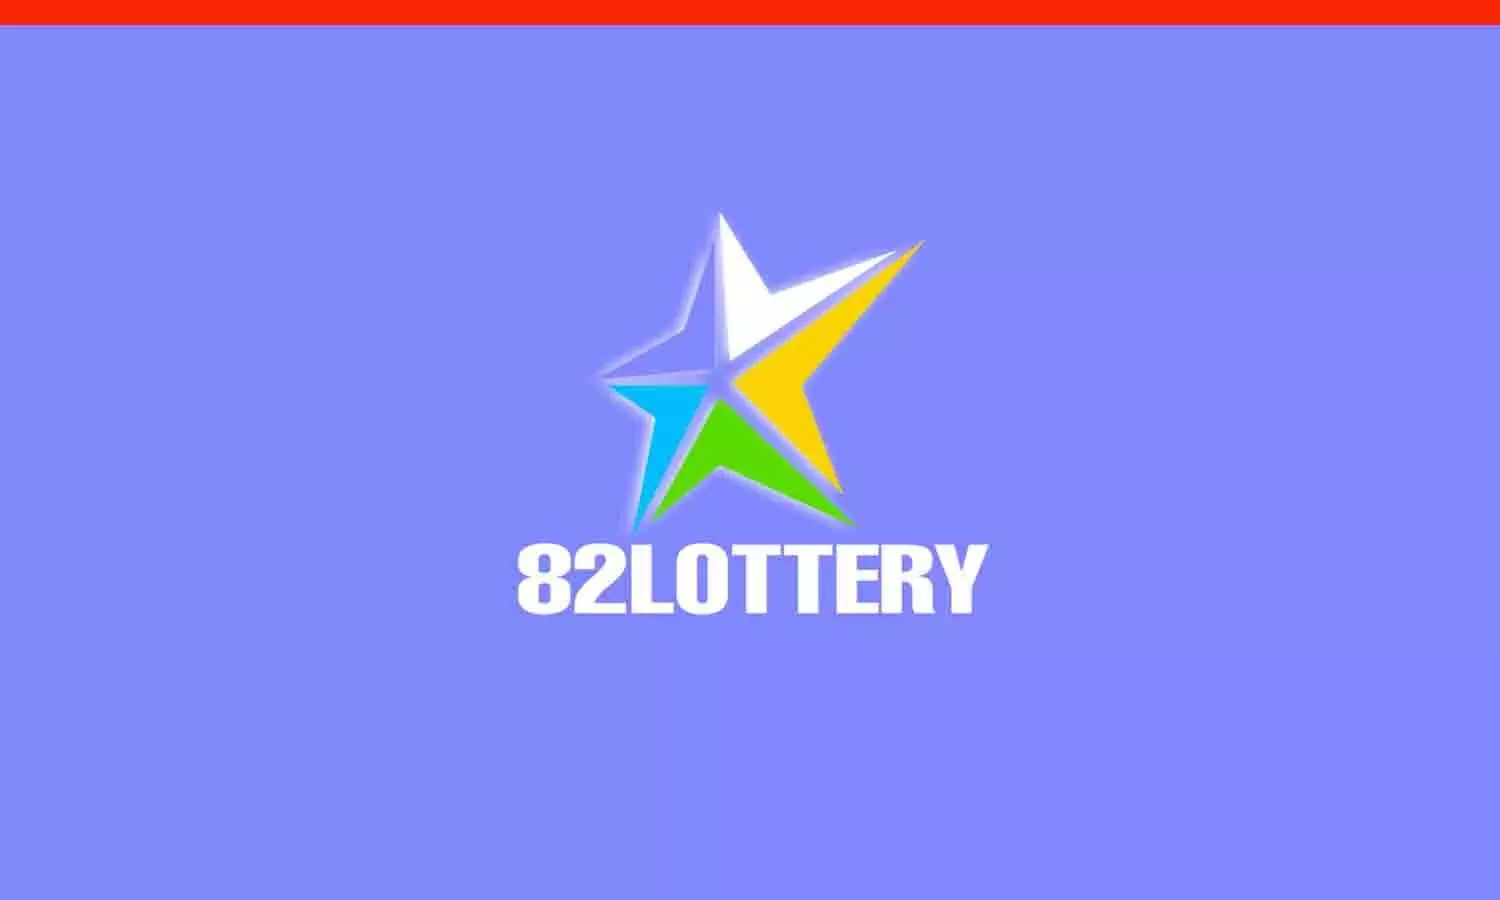 82lottery App Download | Sign Up For Play Games In App